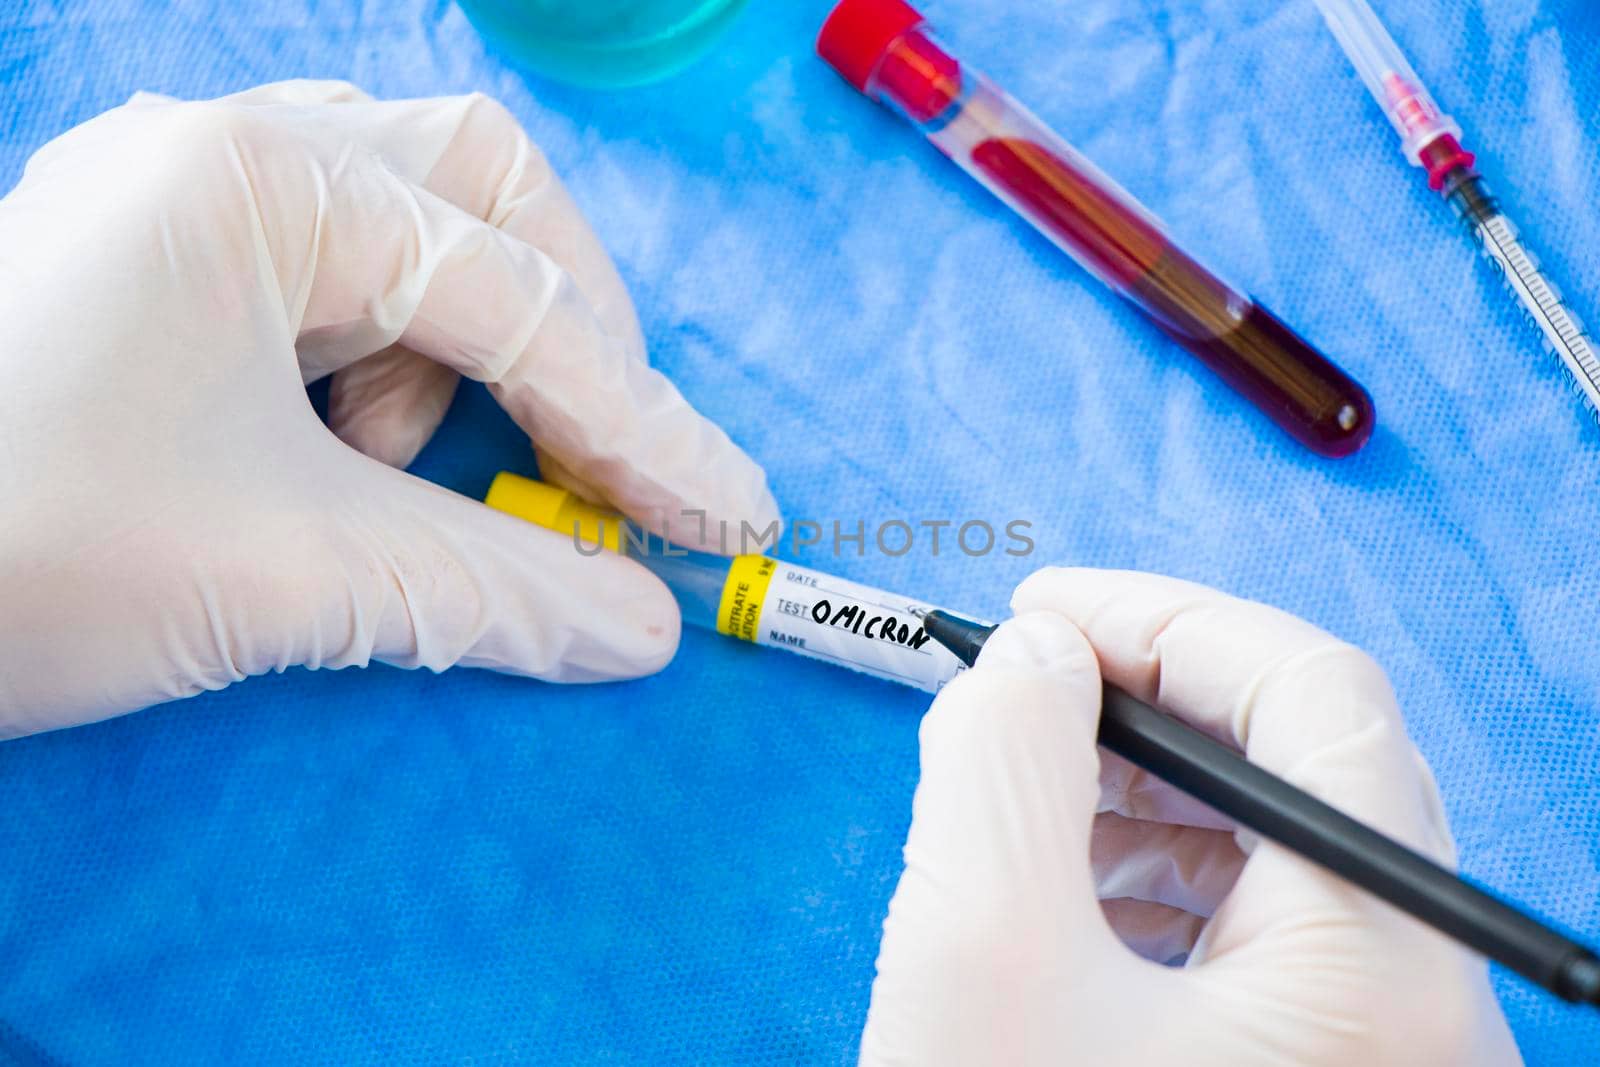 Omicron blood test. Doctor in laboratory with uniform write text on the blood tube sample, white glove